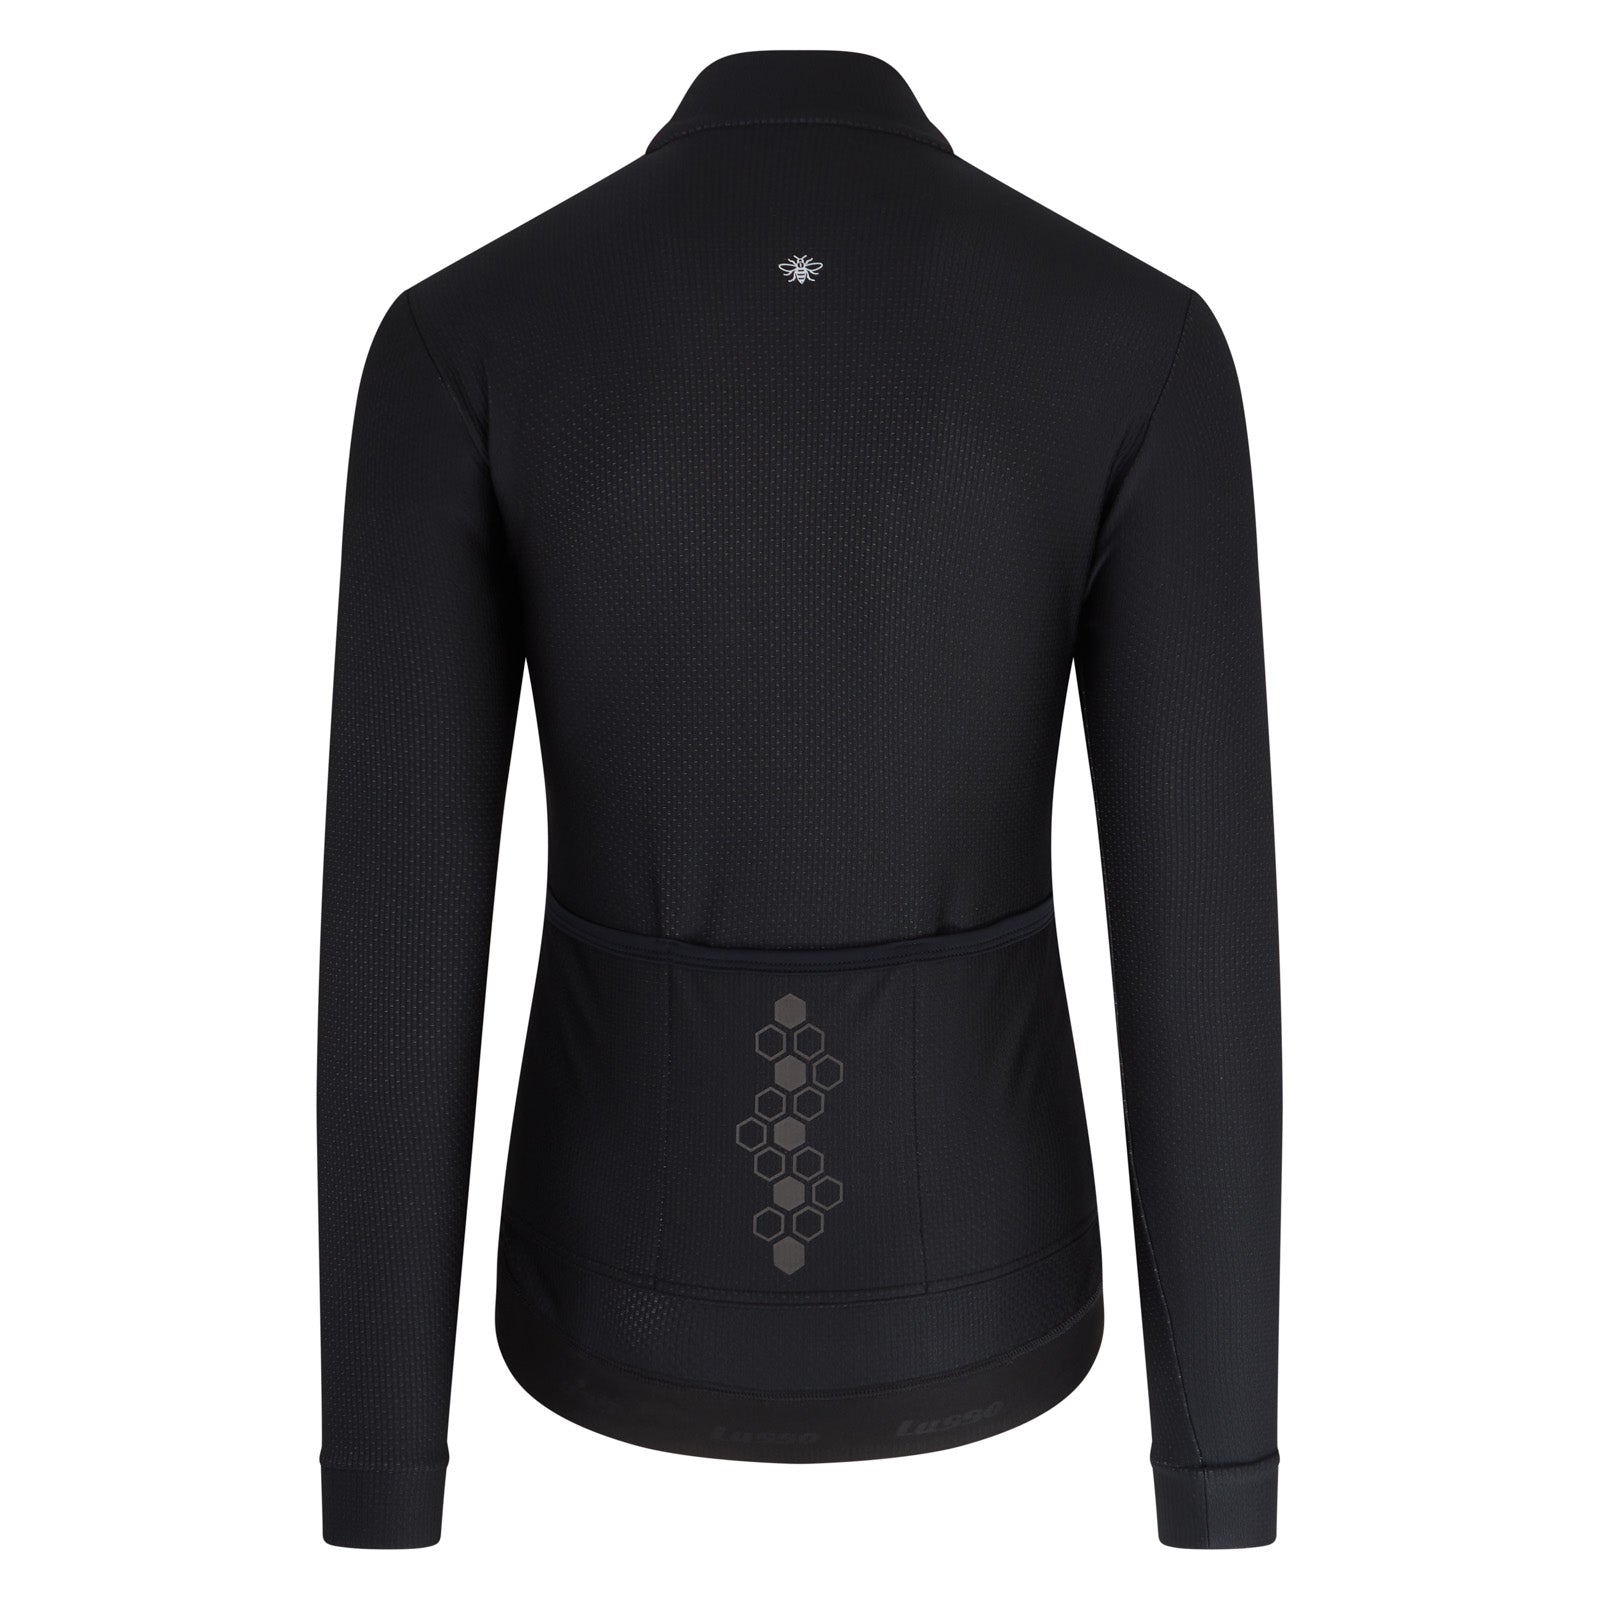 Upcycle Long Sleeve Jersey (Limited edition) - Lusso Cycle Wear